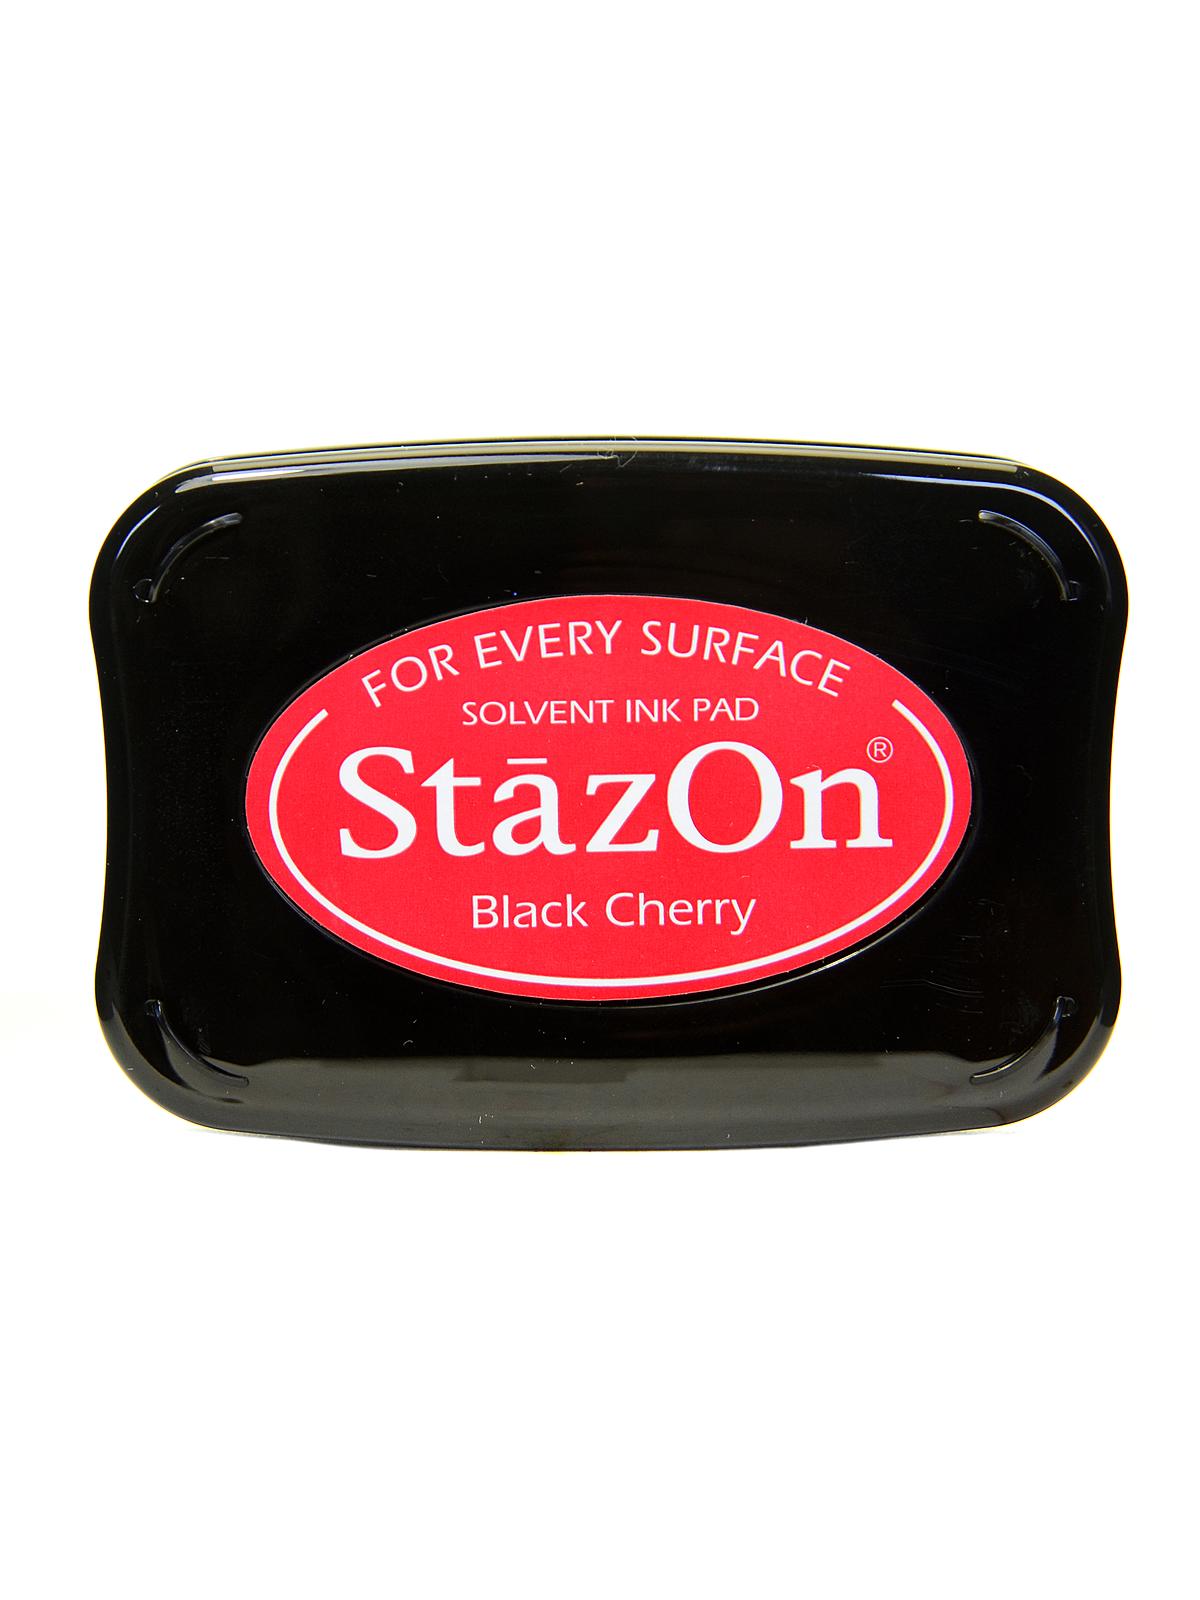 Stazon Solvent Ink Black Cherry 3.75 In. X 2.625 In. Full-size Pad